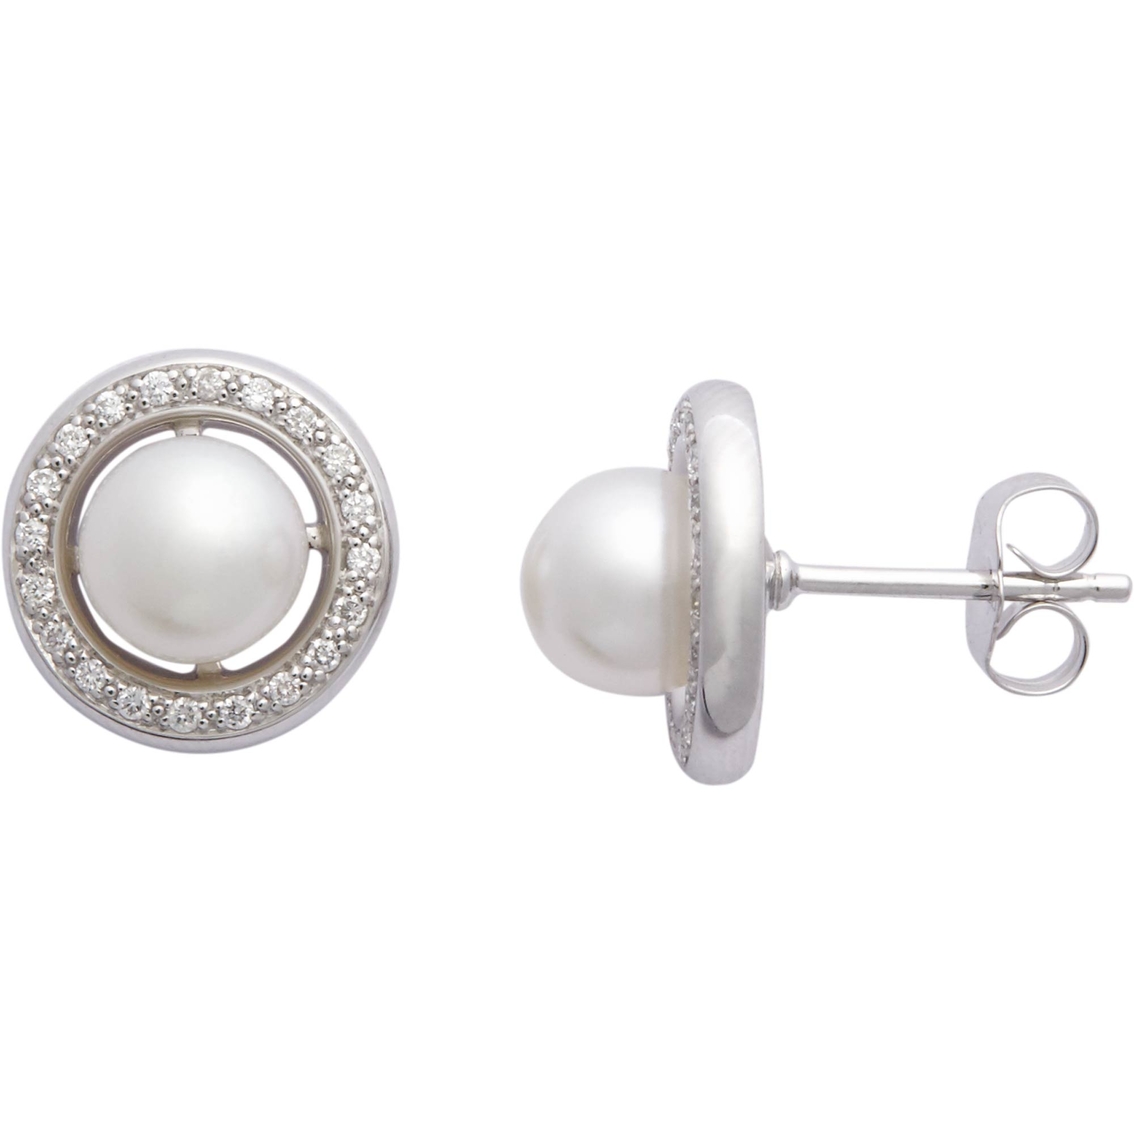 Blue Lagoon By Mikimoto 14k White Gold 6.5mm Cultured Akoya Pearl ...